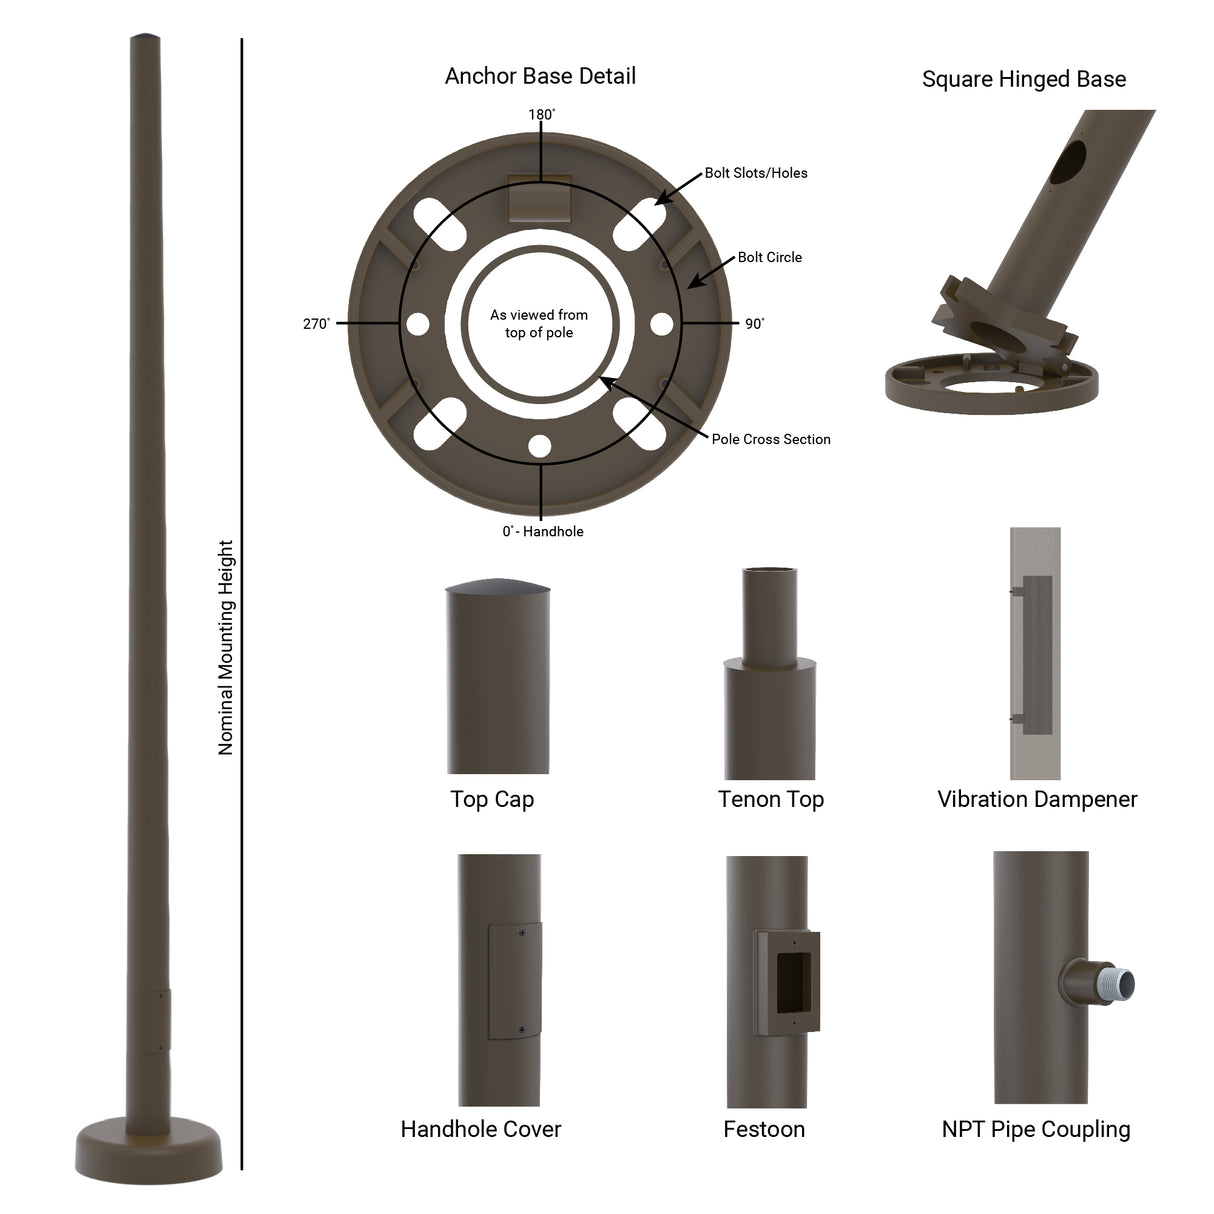 18' Tall x 5.0" Base OD x 3.0" Top OD x 0.156" Thick, Round Tapered Aluminum, Hinged Anchor Base Light Pole